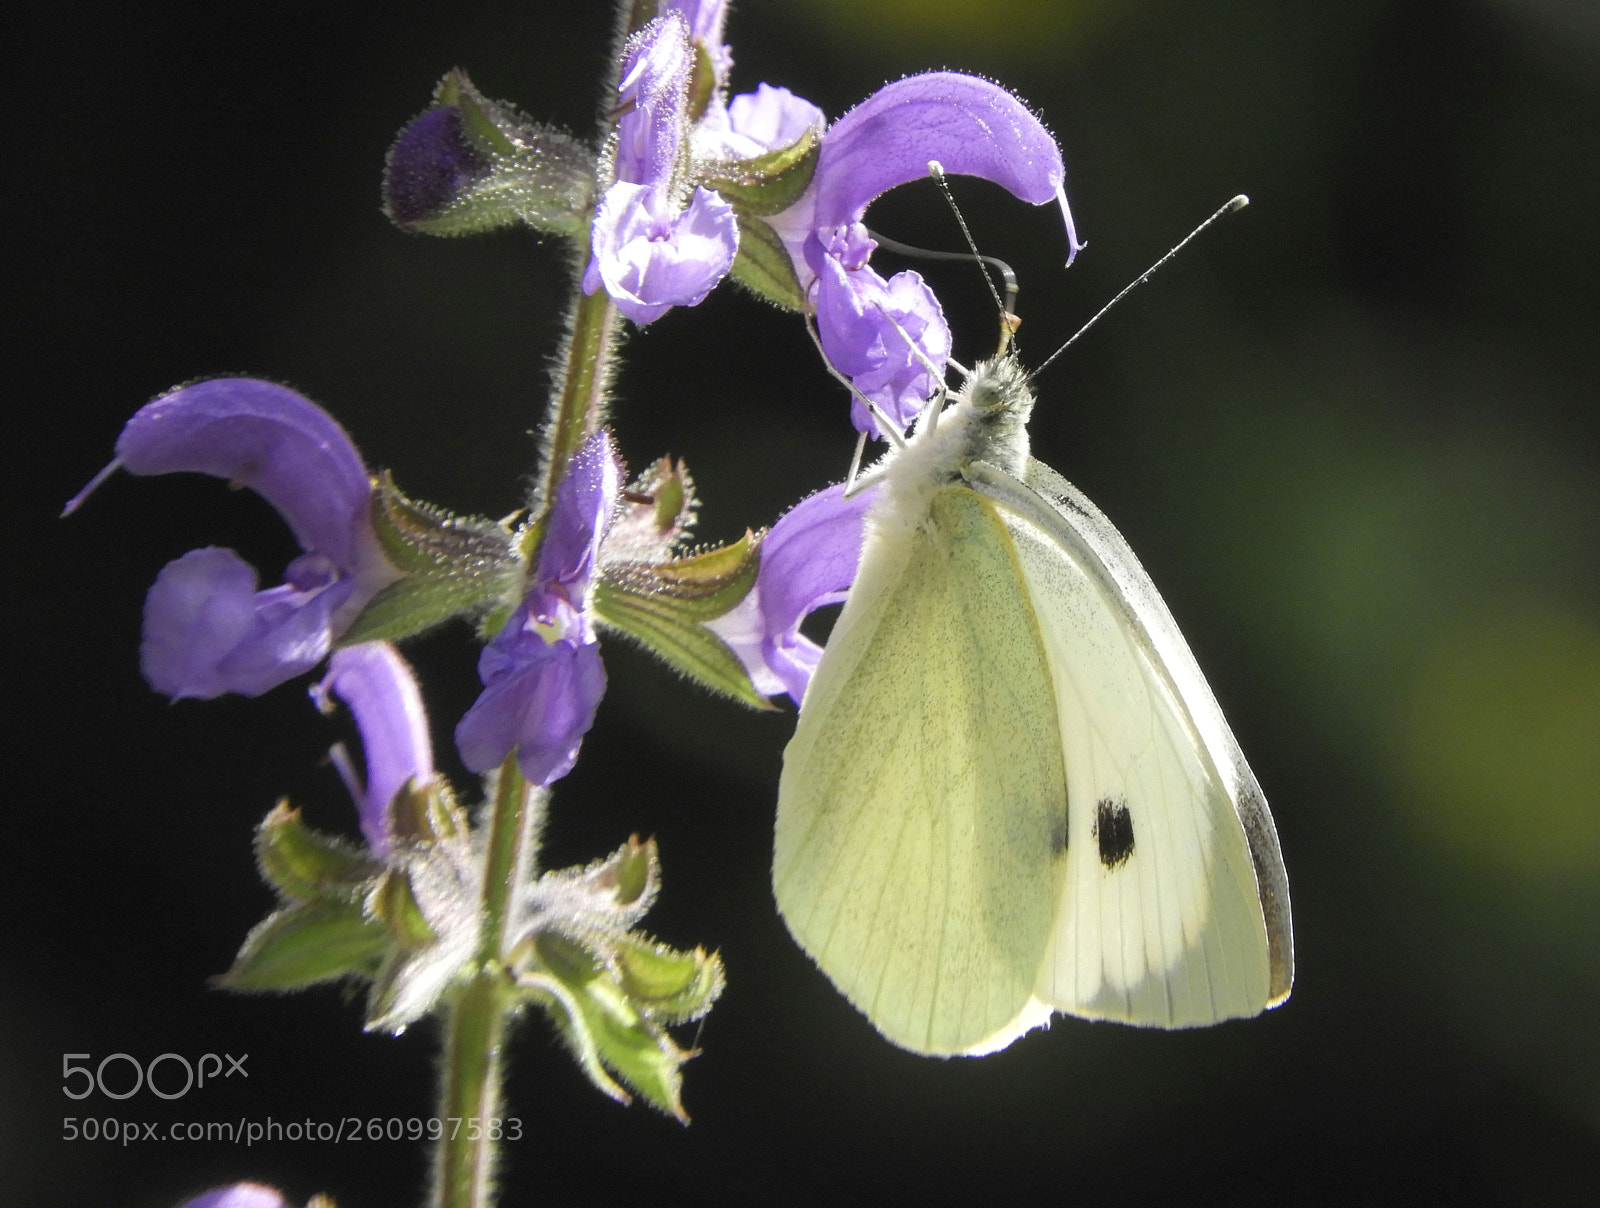 Nikon Coolpix B700 sample photo. Large white butterfly photography